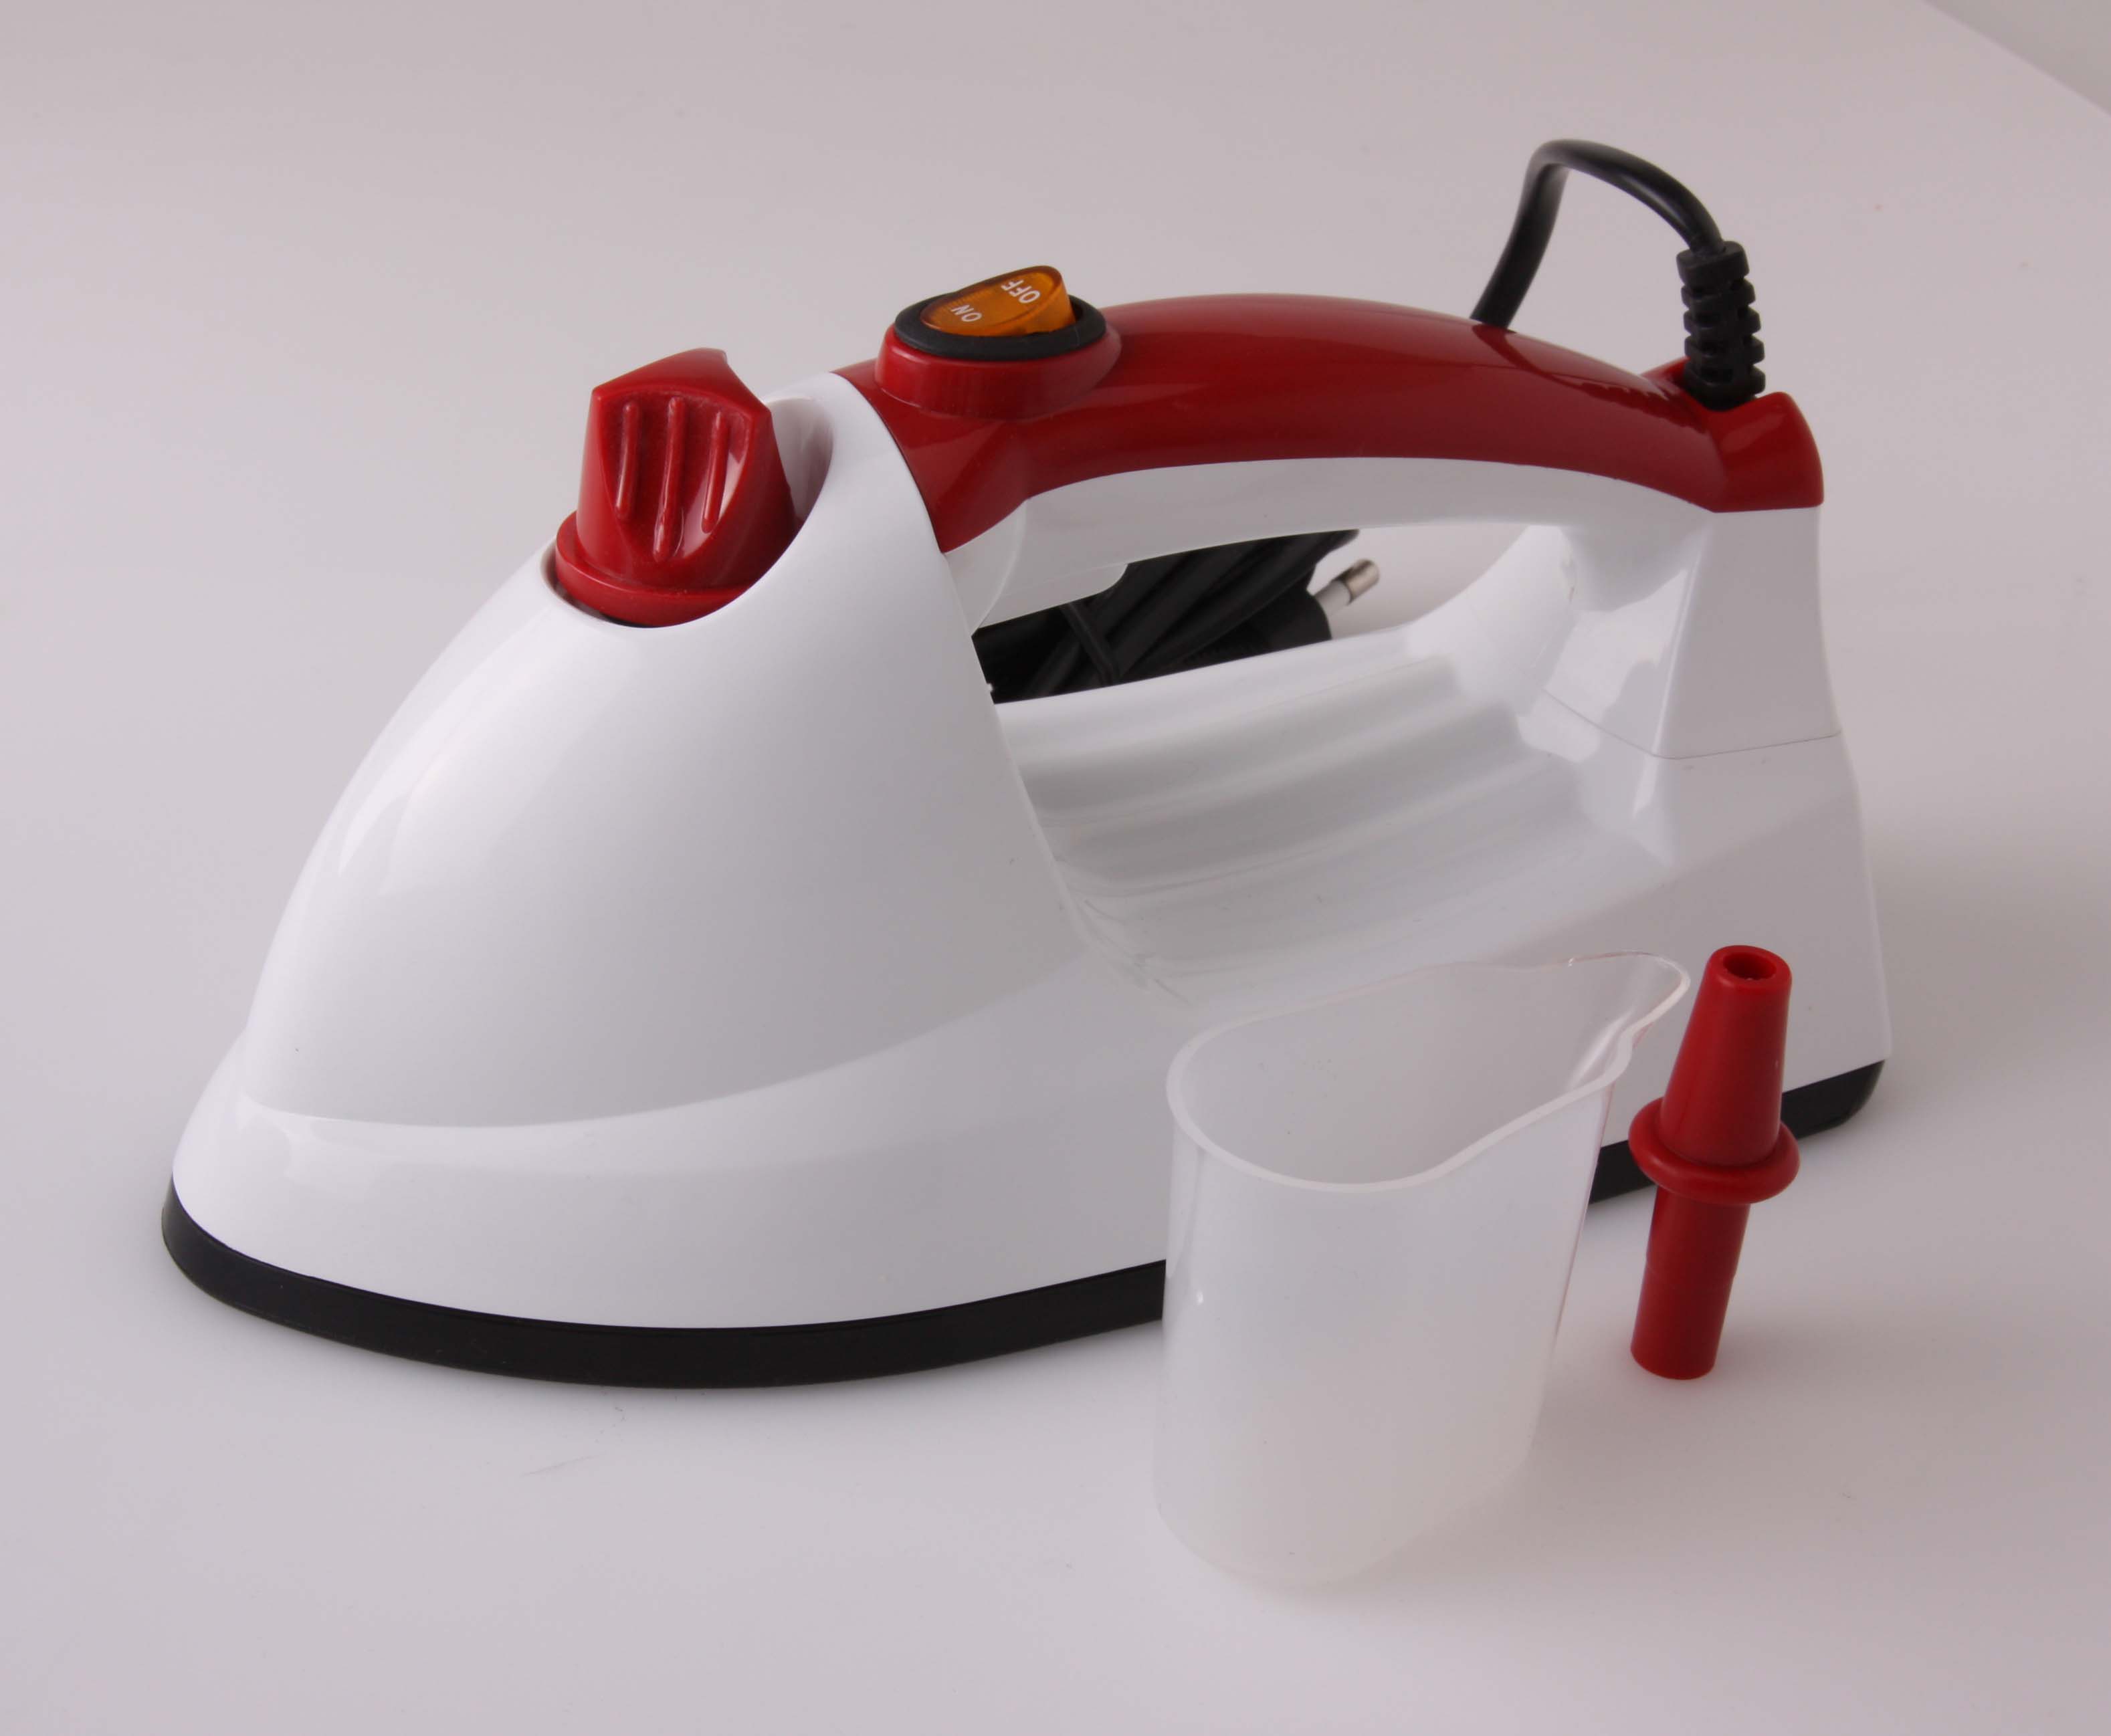 Steam Iron | Other Products of Vastwood | Vastwood